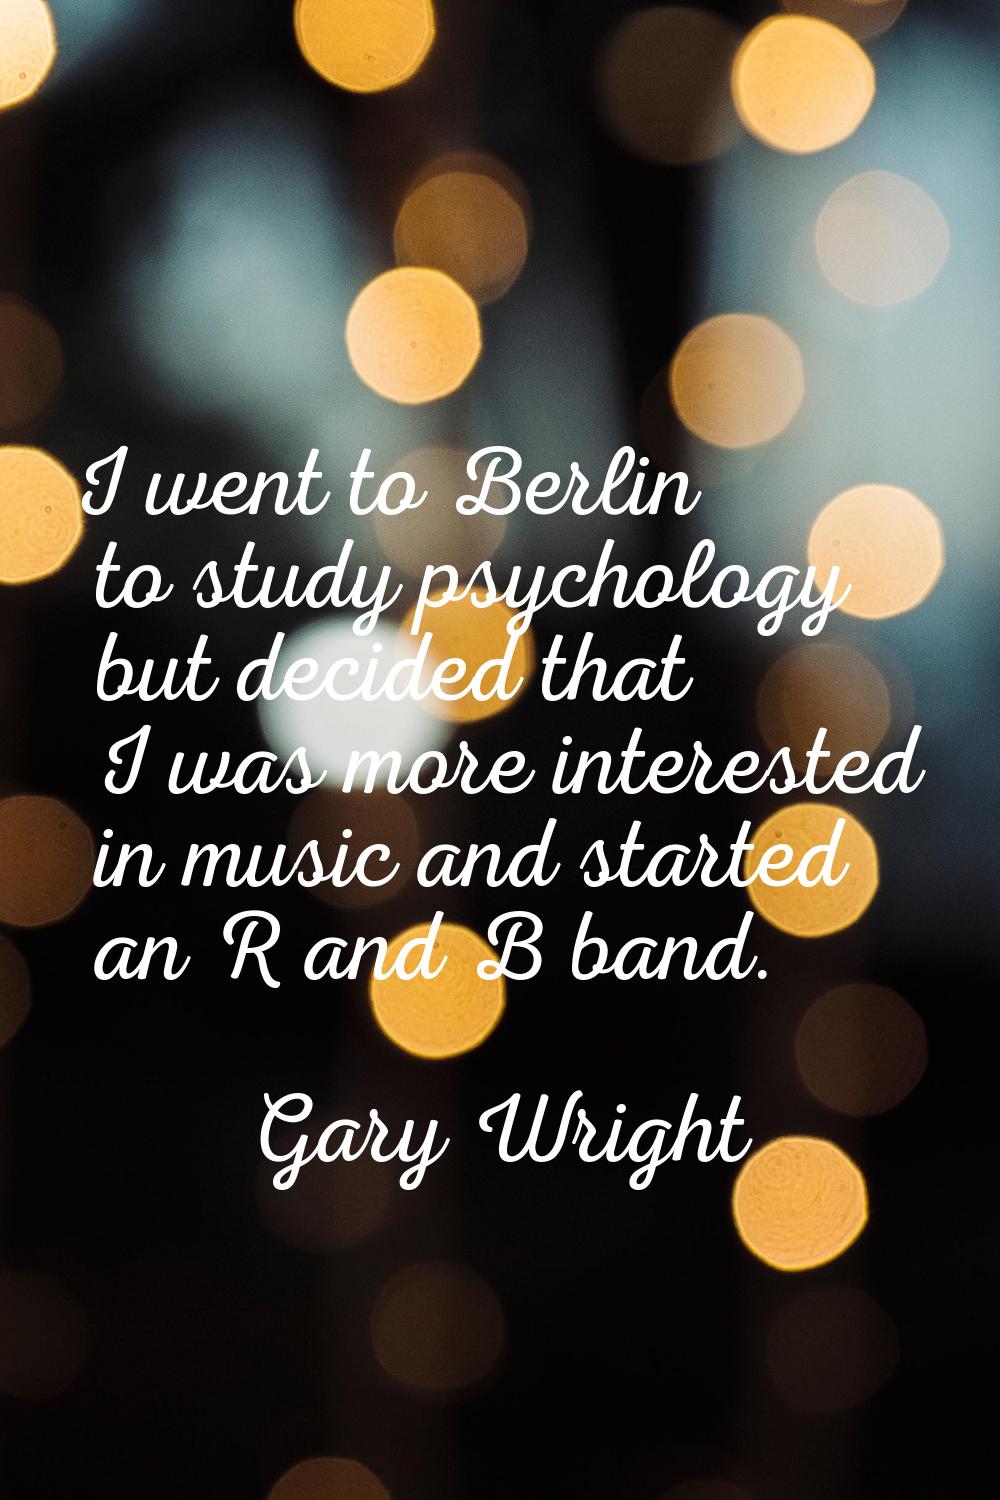 I went to Berlin to study psychology but decided that I was more interested in music and started an